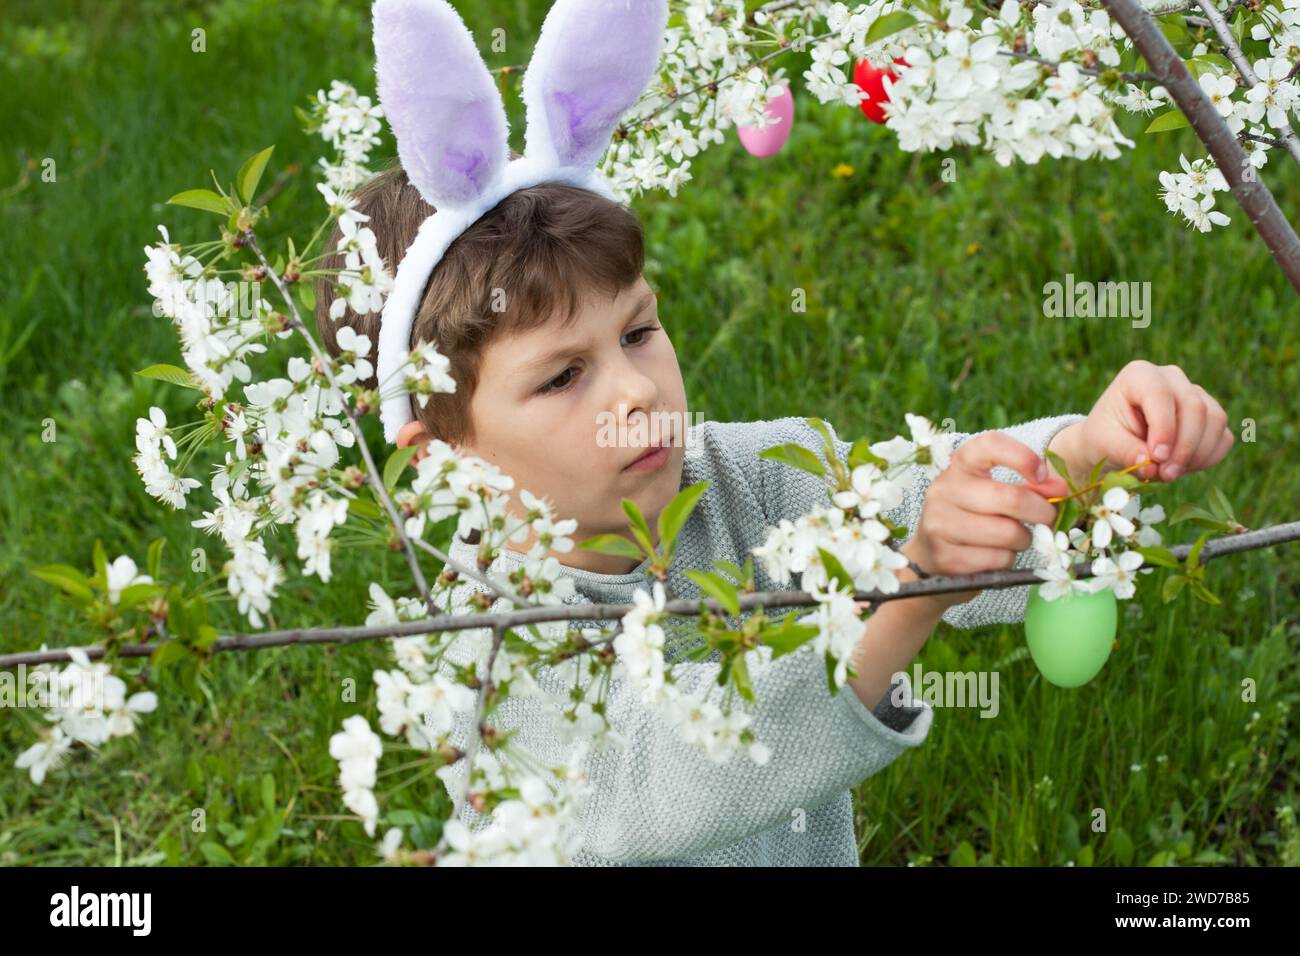 Easter egg hunt. preschool boy wearing bunny ears collecting colorful eggs on Easter egg hunt in garden. child decorating branches of flowering tree w Stock Photo